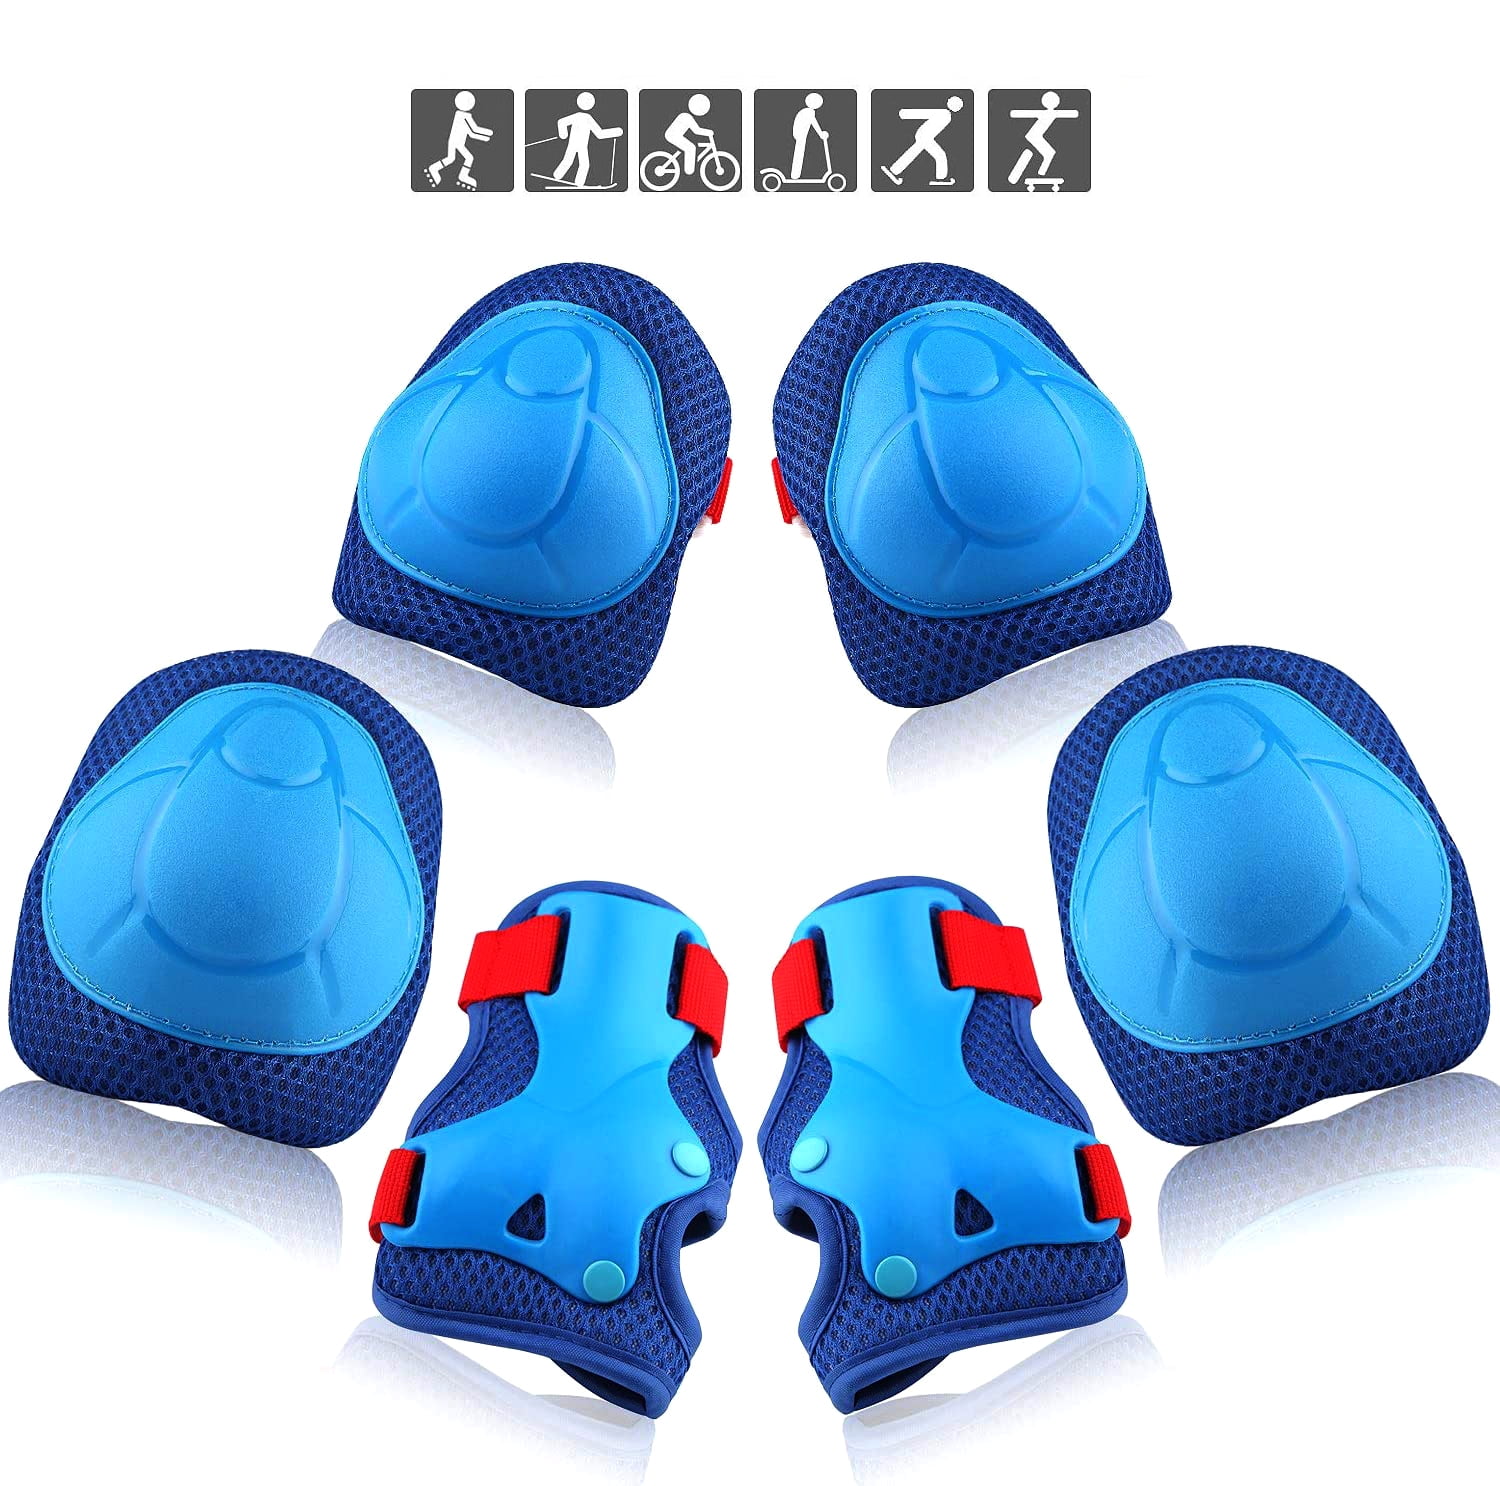 Kids Protective Gear Set Knee Pads for Kids 3-14 Years Toddler Knee and Elbow P 